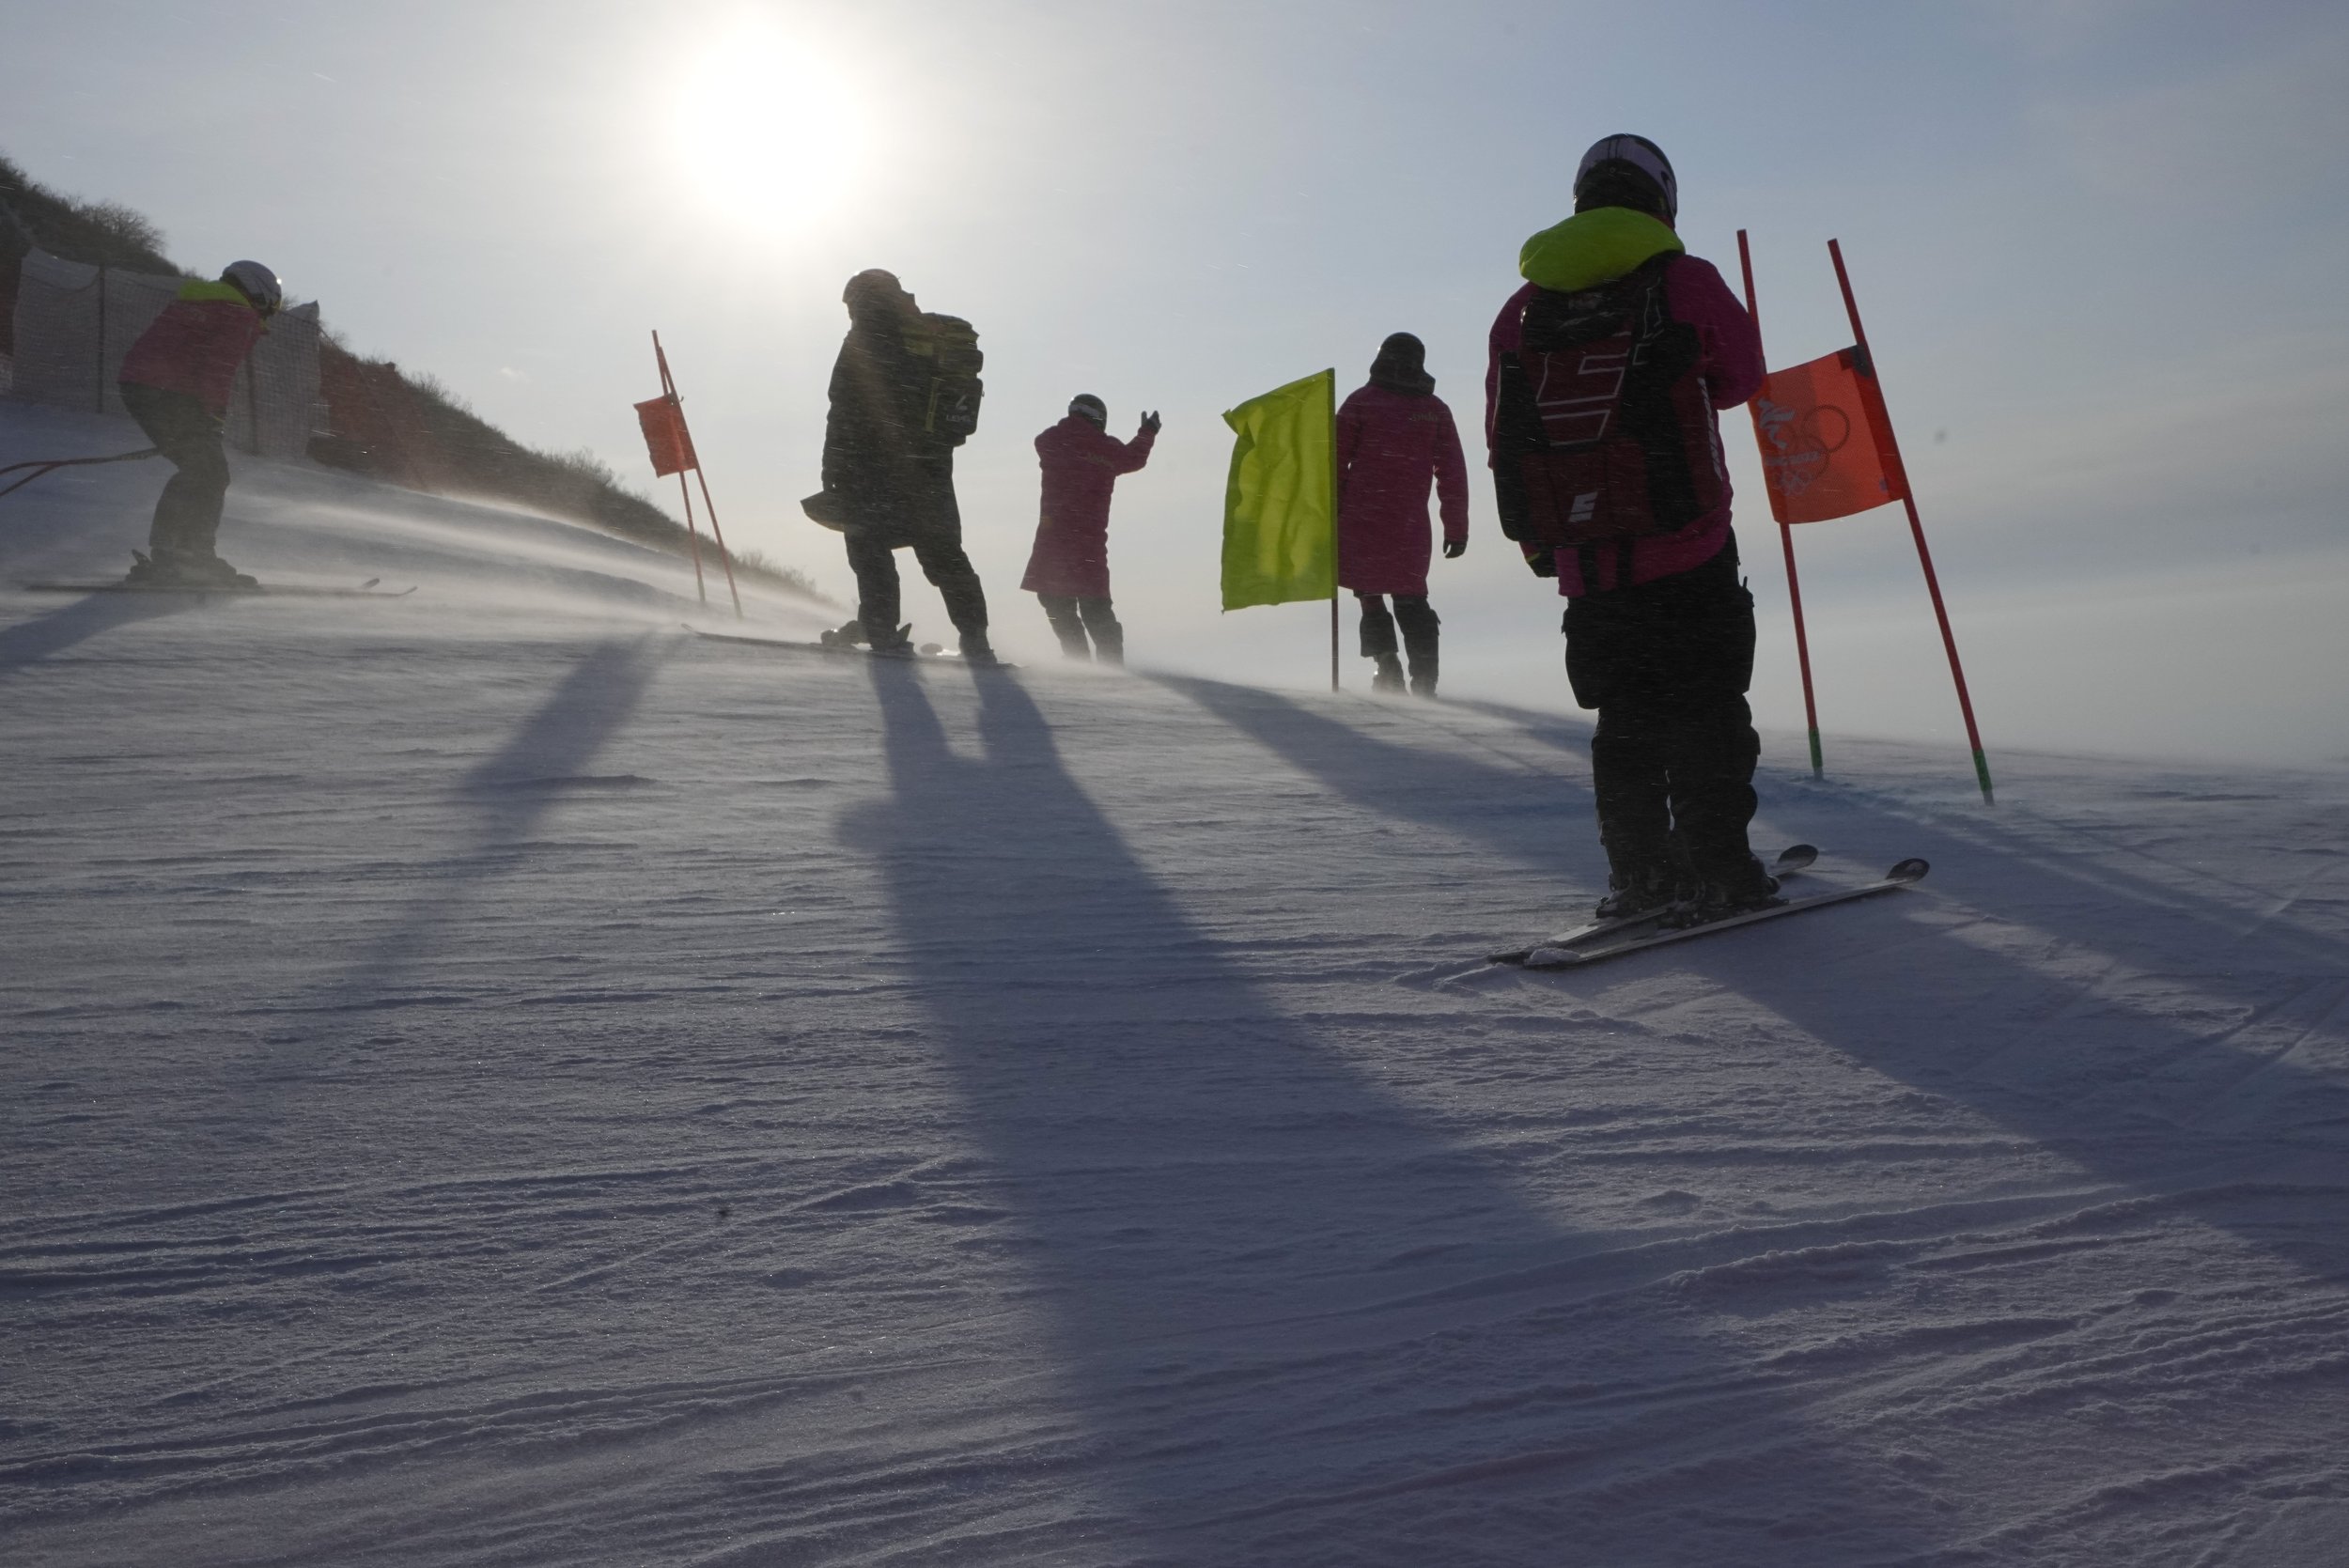  Officials stand on the course as a gust of wind blows powder across the slopes of the course for the women's combined downhill at the 2022 Winter Olympics, Thursday, Feb. 17, 2022, in the Yanqing district of Beijing. (AP Photo/Robert F. Bukaty) 